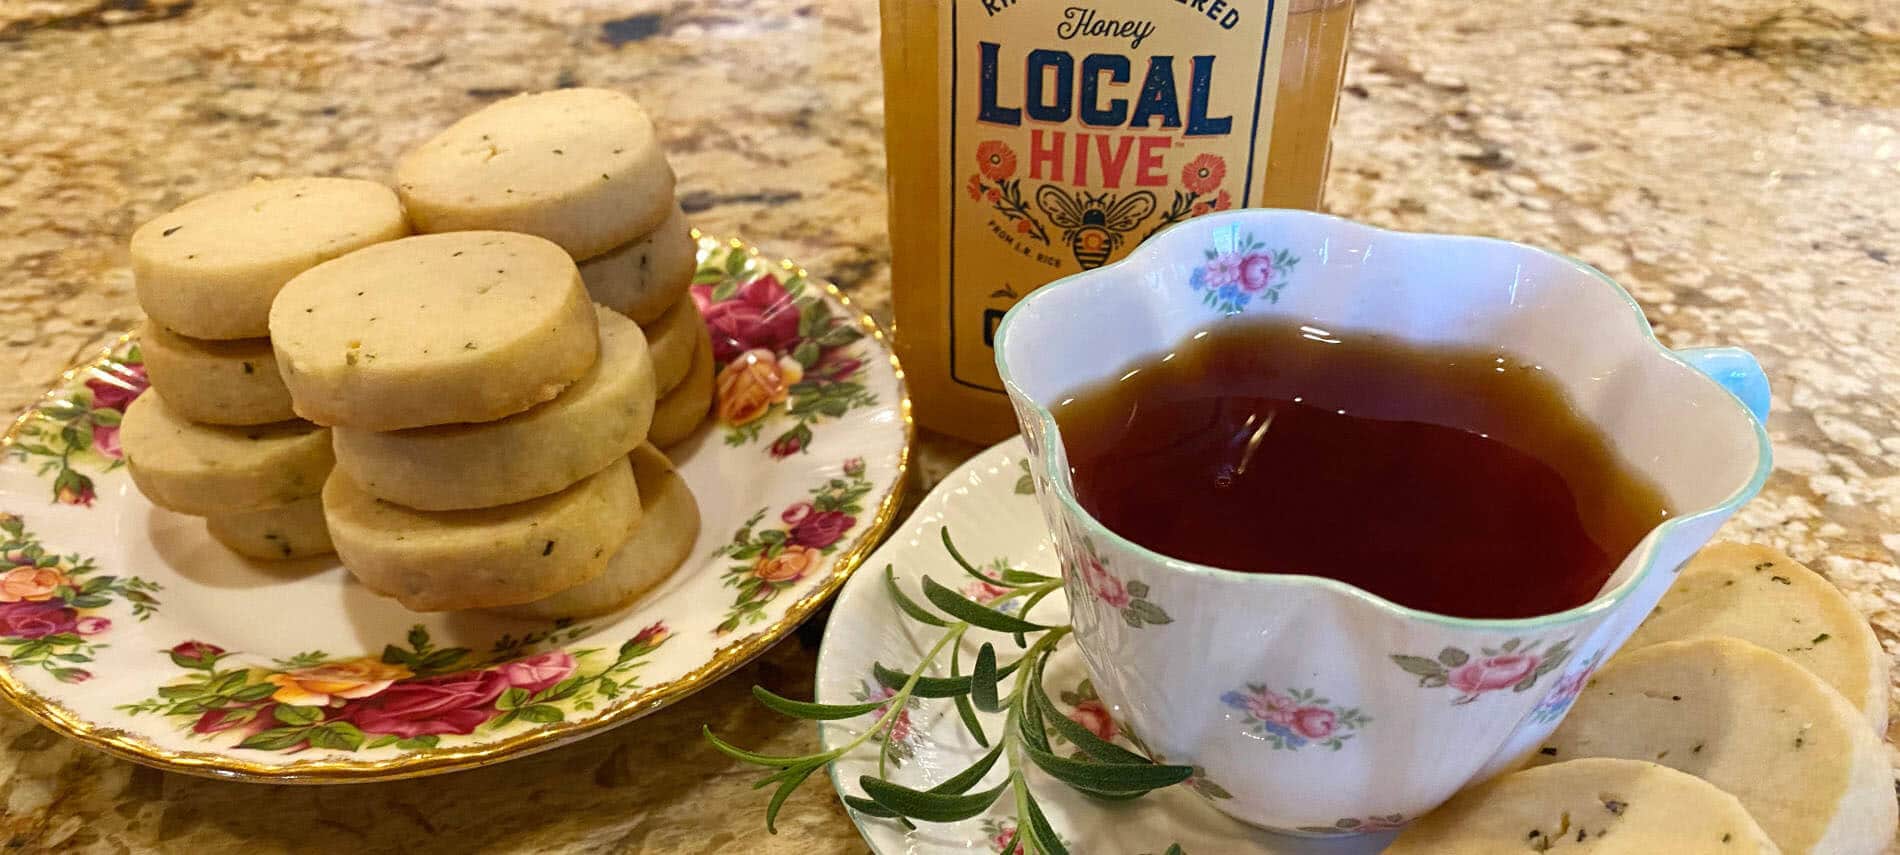 Round shortbread cookies with specs of rosemary along with a cup of tea a a jar of honey